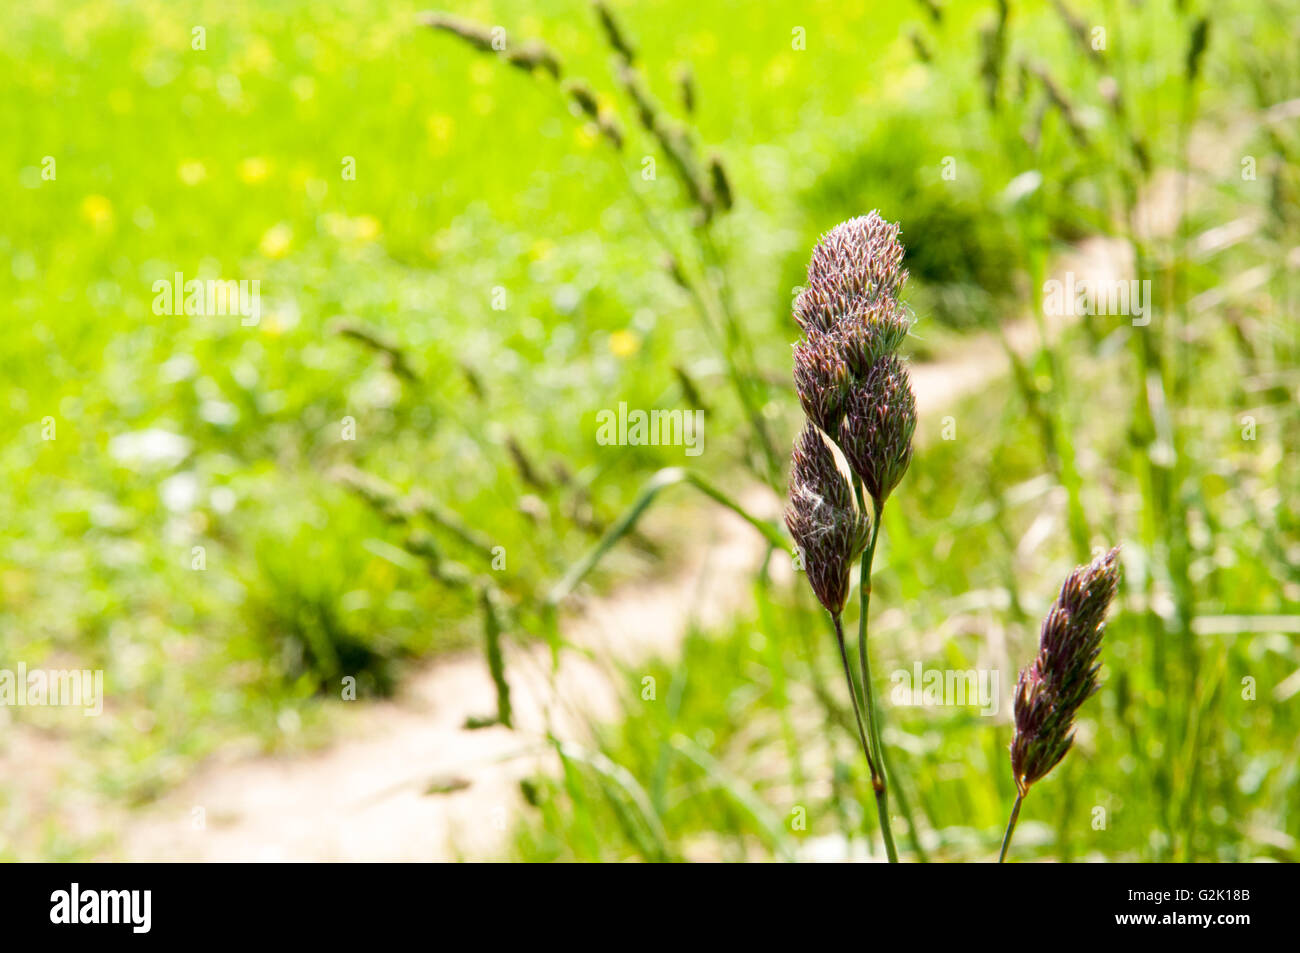 Long grass in the foreground of a summer meadow Stock Photo